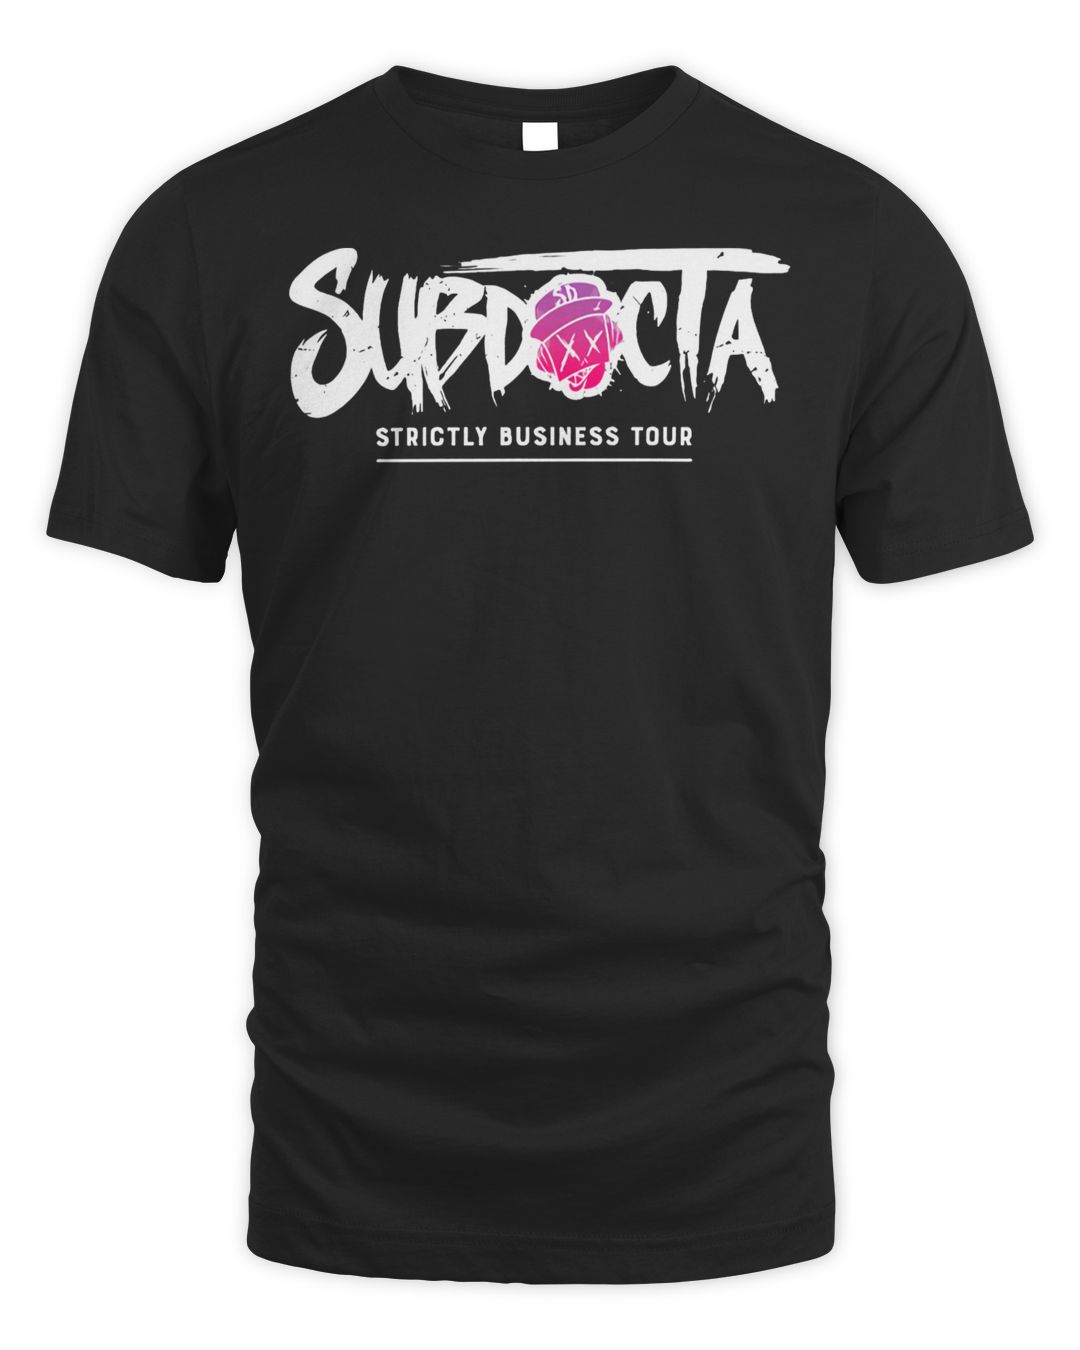 Subdocta Merch Strictly Business Shirt